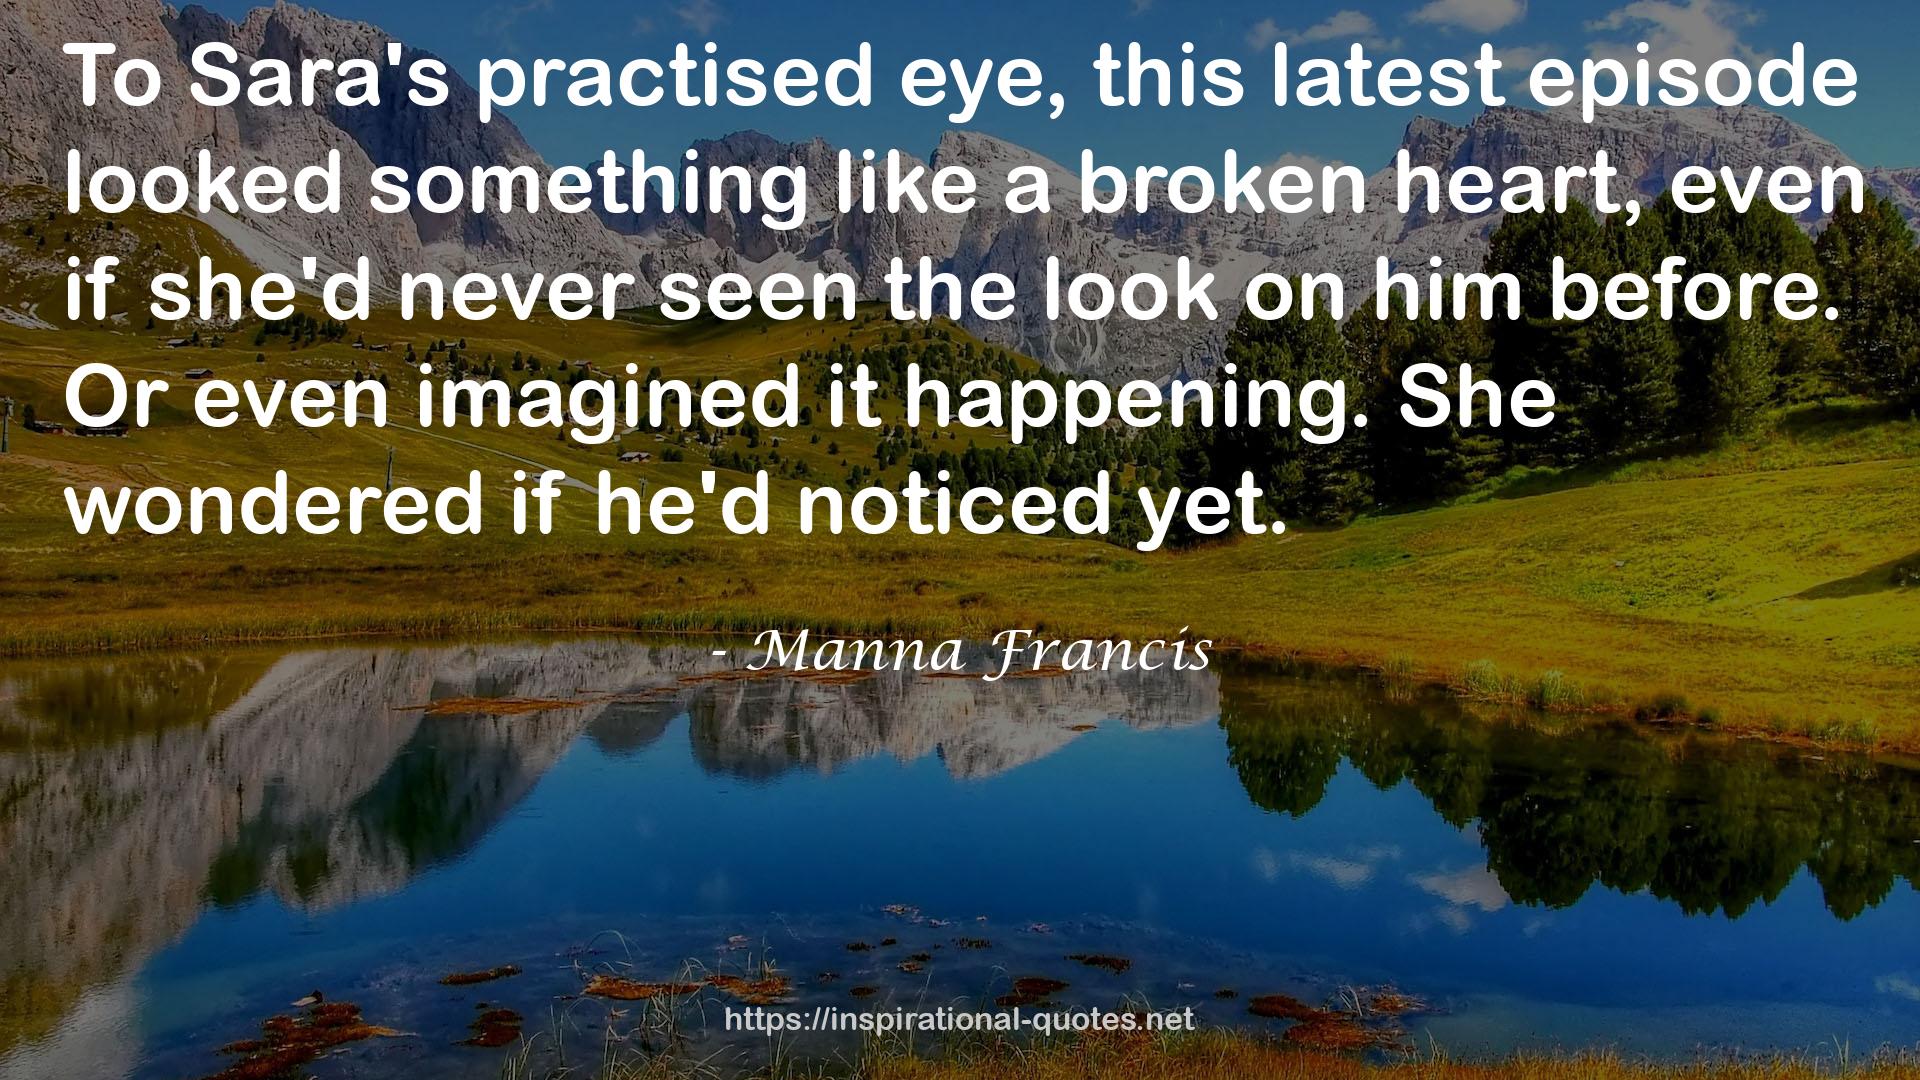 Manna Francis QUOTES